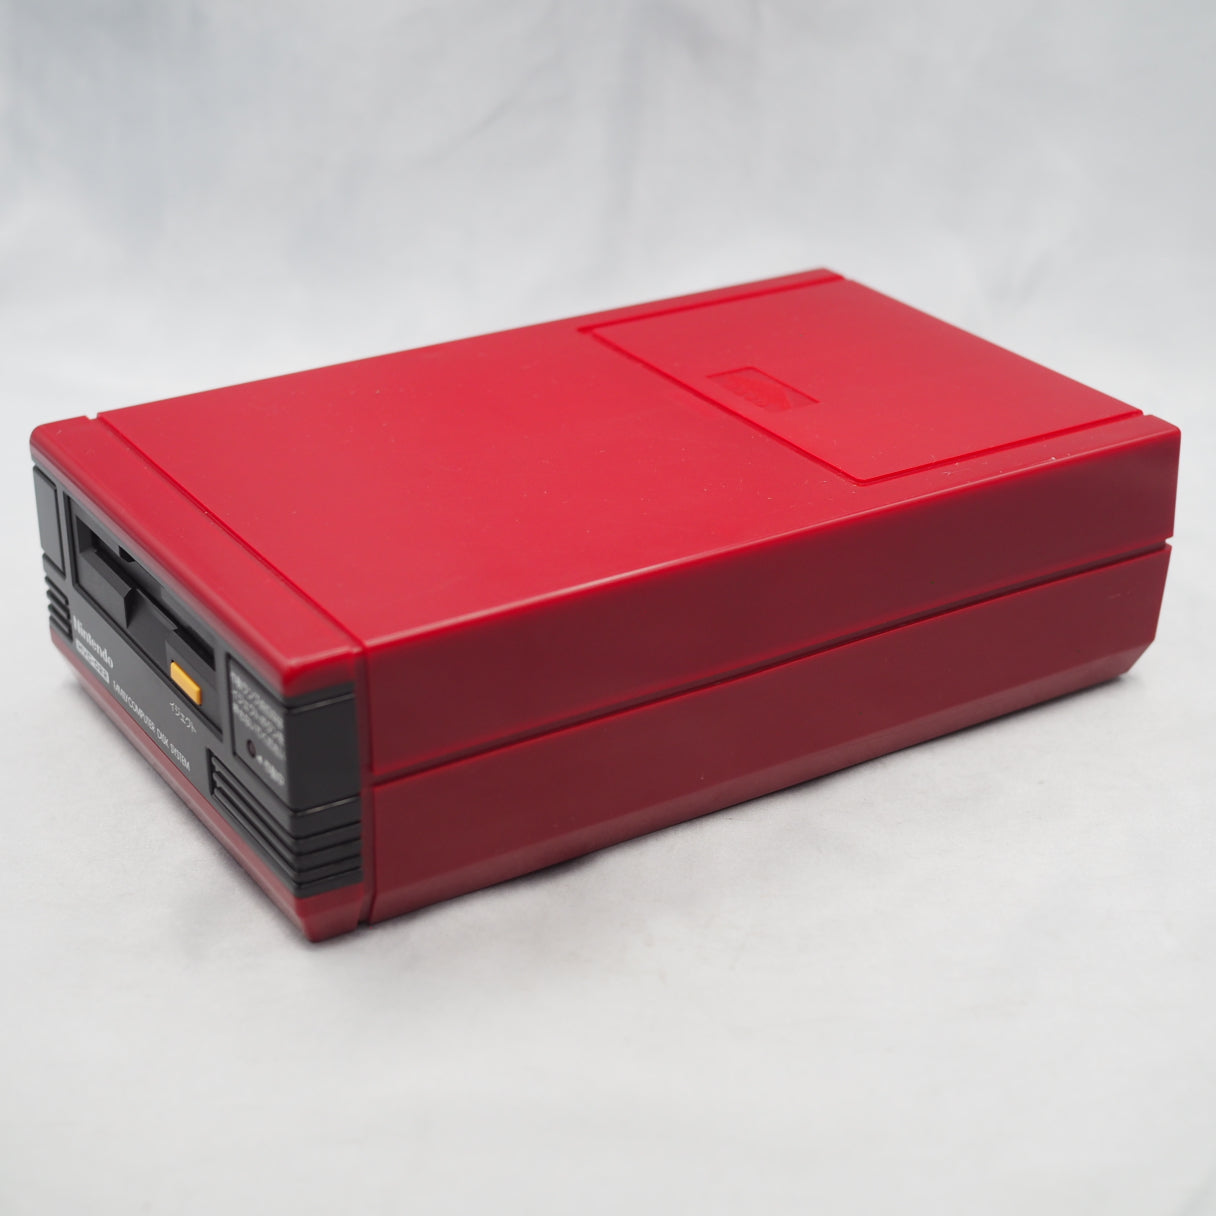 Nintendo Disk System HVC-022 [New Rubber Belt Replaced]